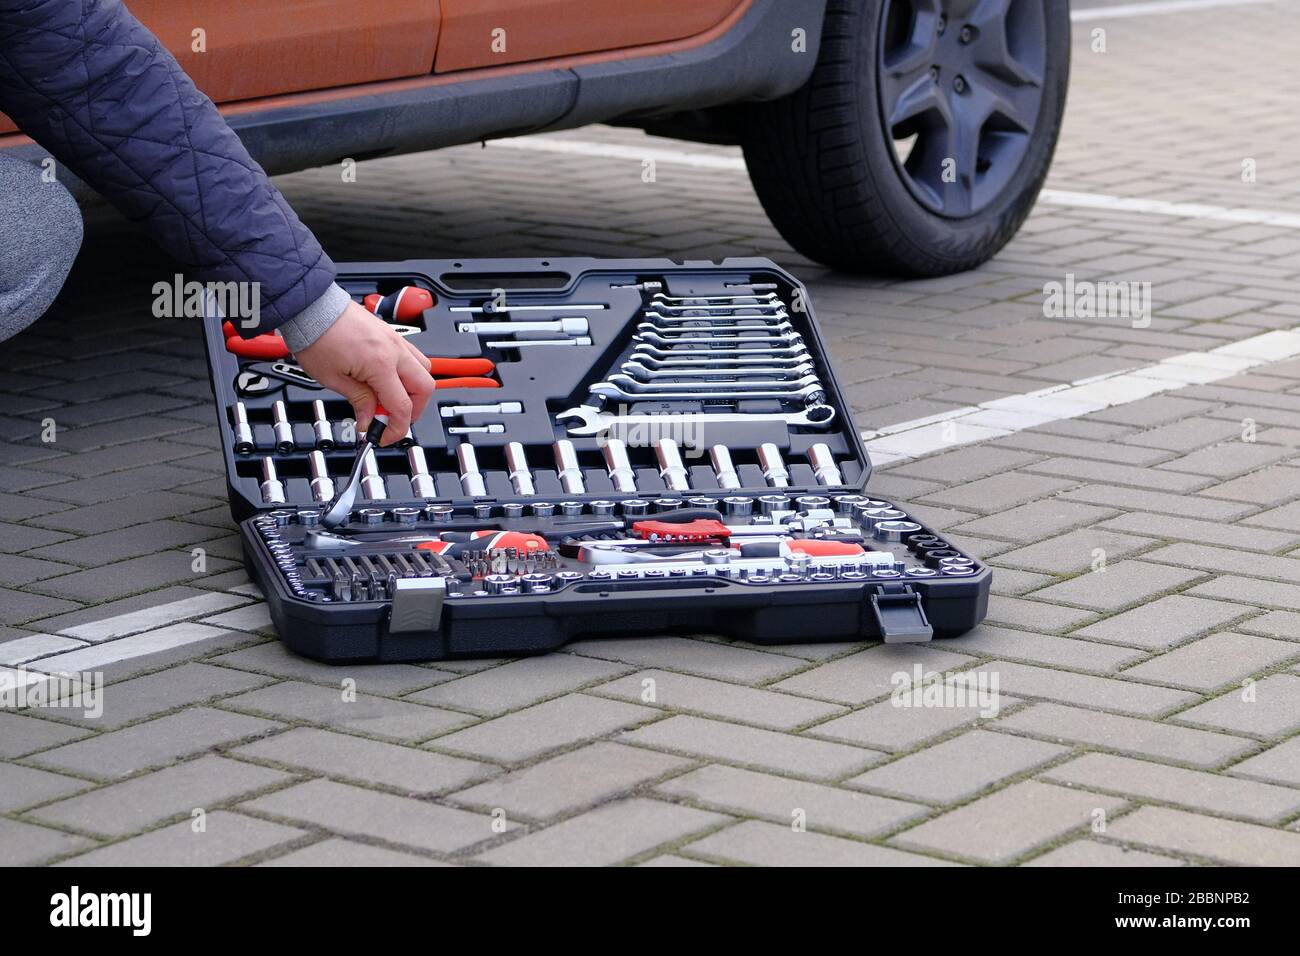 Tool set in box near the orange auto. Сar driver using different repair  tools for repairing a vehicle. Automobile maintenance concept Stock Photo -  Alamy